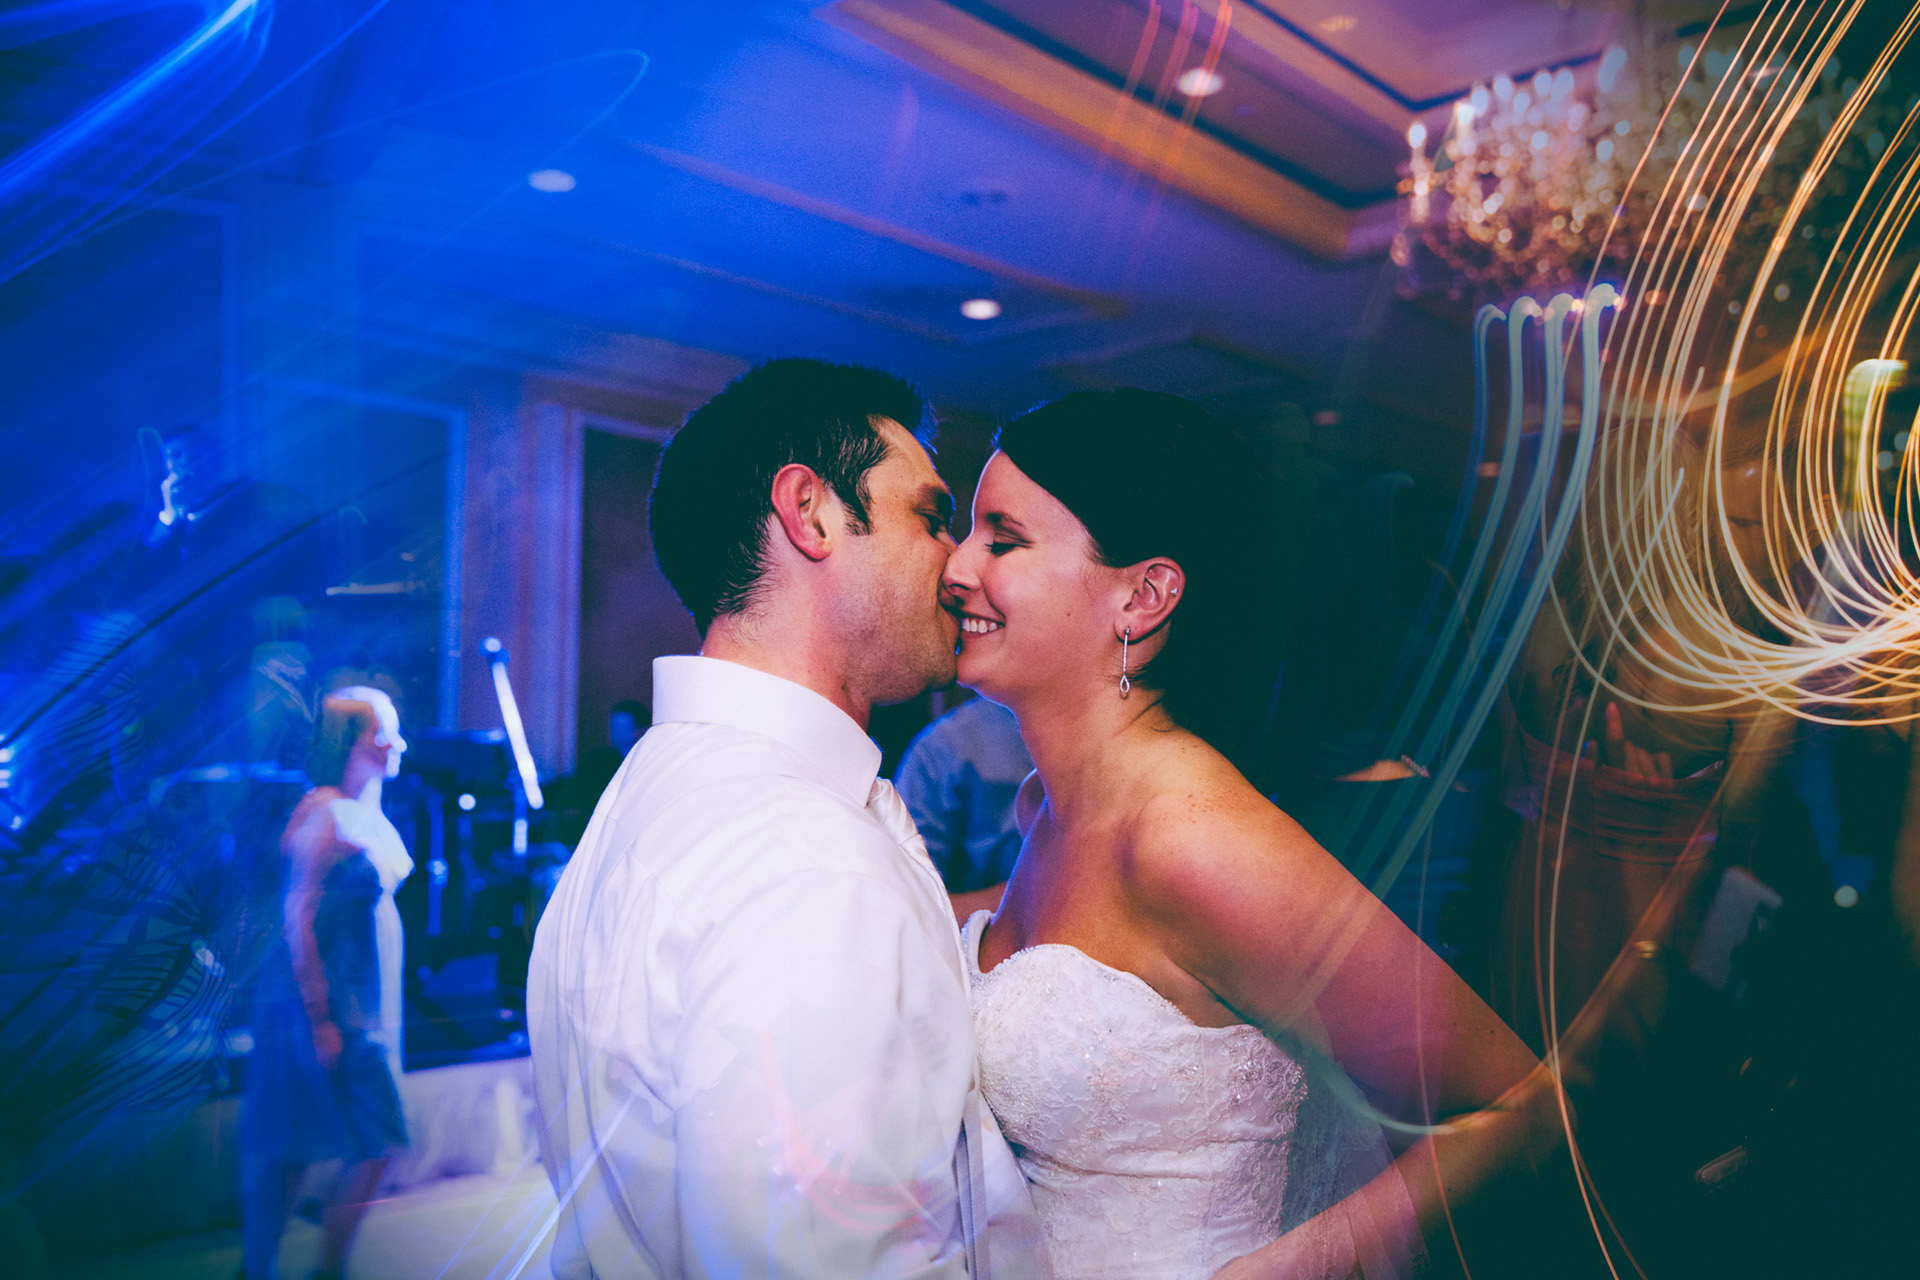 Cleveland Wedding at the Ritz Carlton Hotel - Too Much Awesomeness Photographer 44.jpg